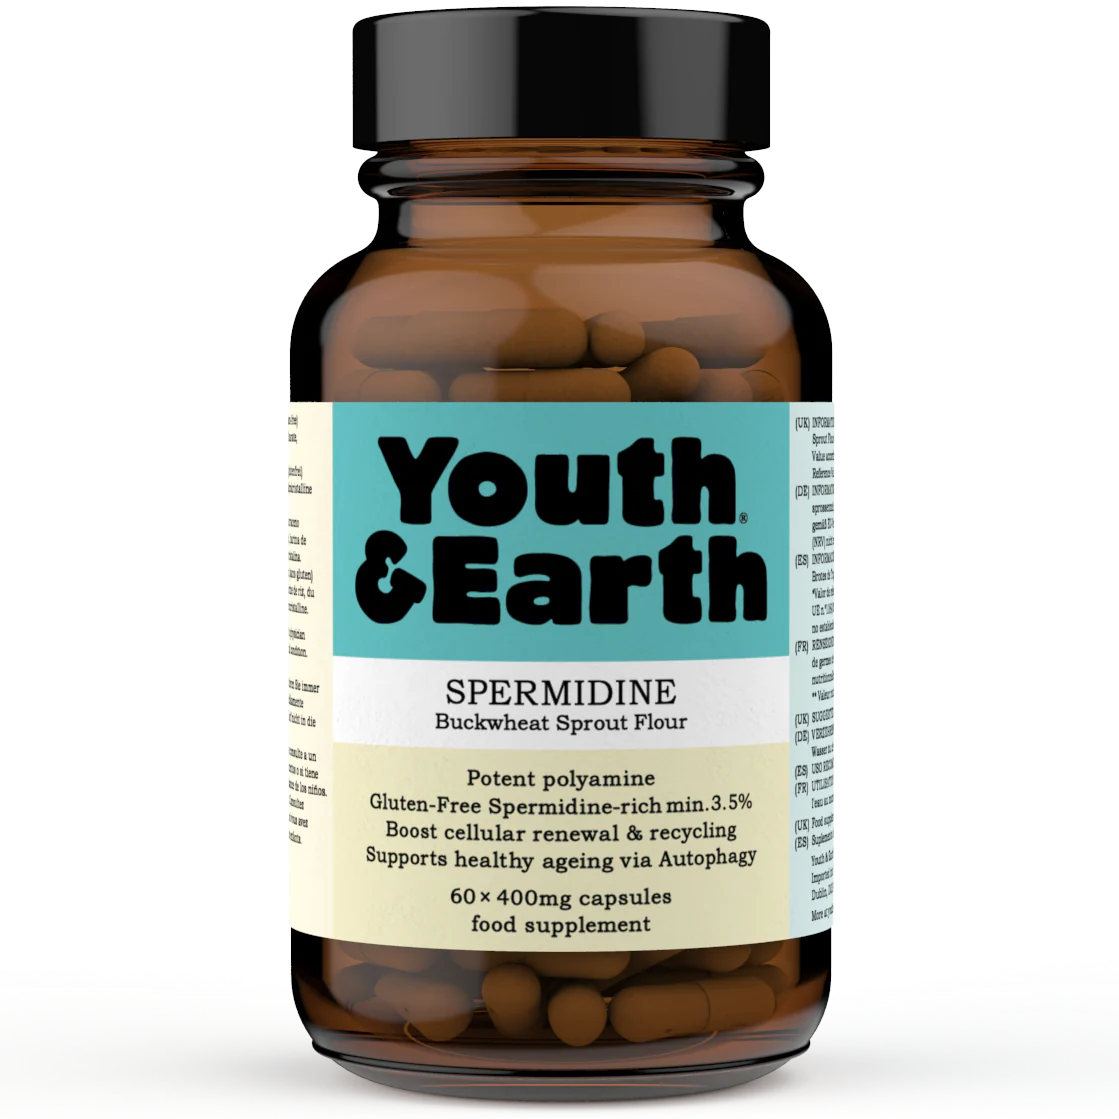 Spermidine Supplement from Yougn & Earth